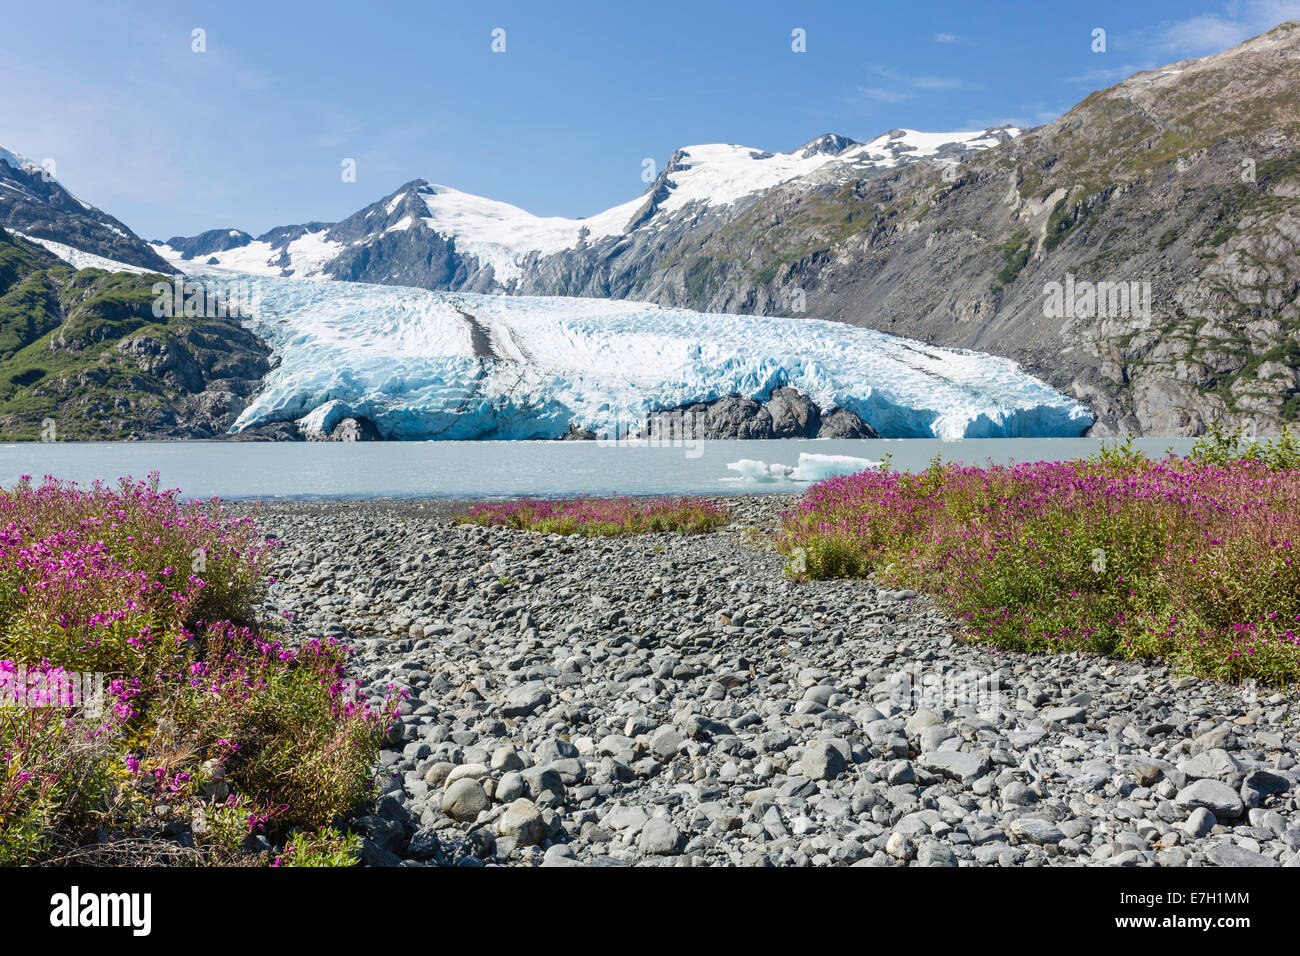 Dwarf Fireweed lines the shore of Portage Lake with Portage Glacier in the background in the Chugach National Forest in Alaska. Stock Photo